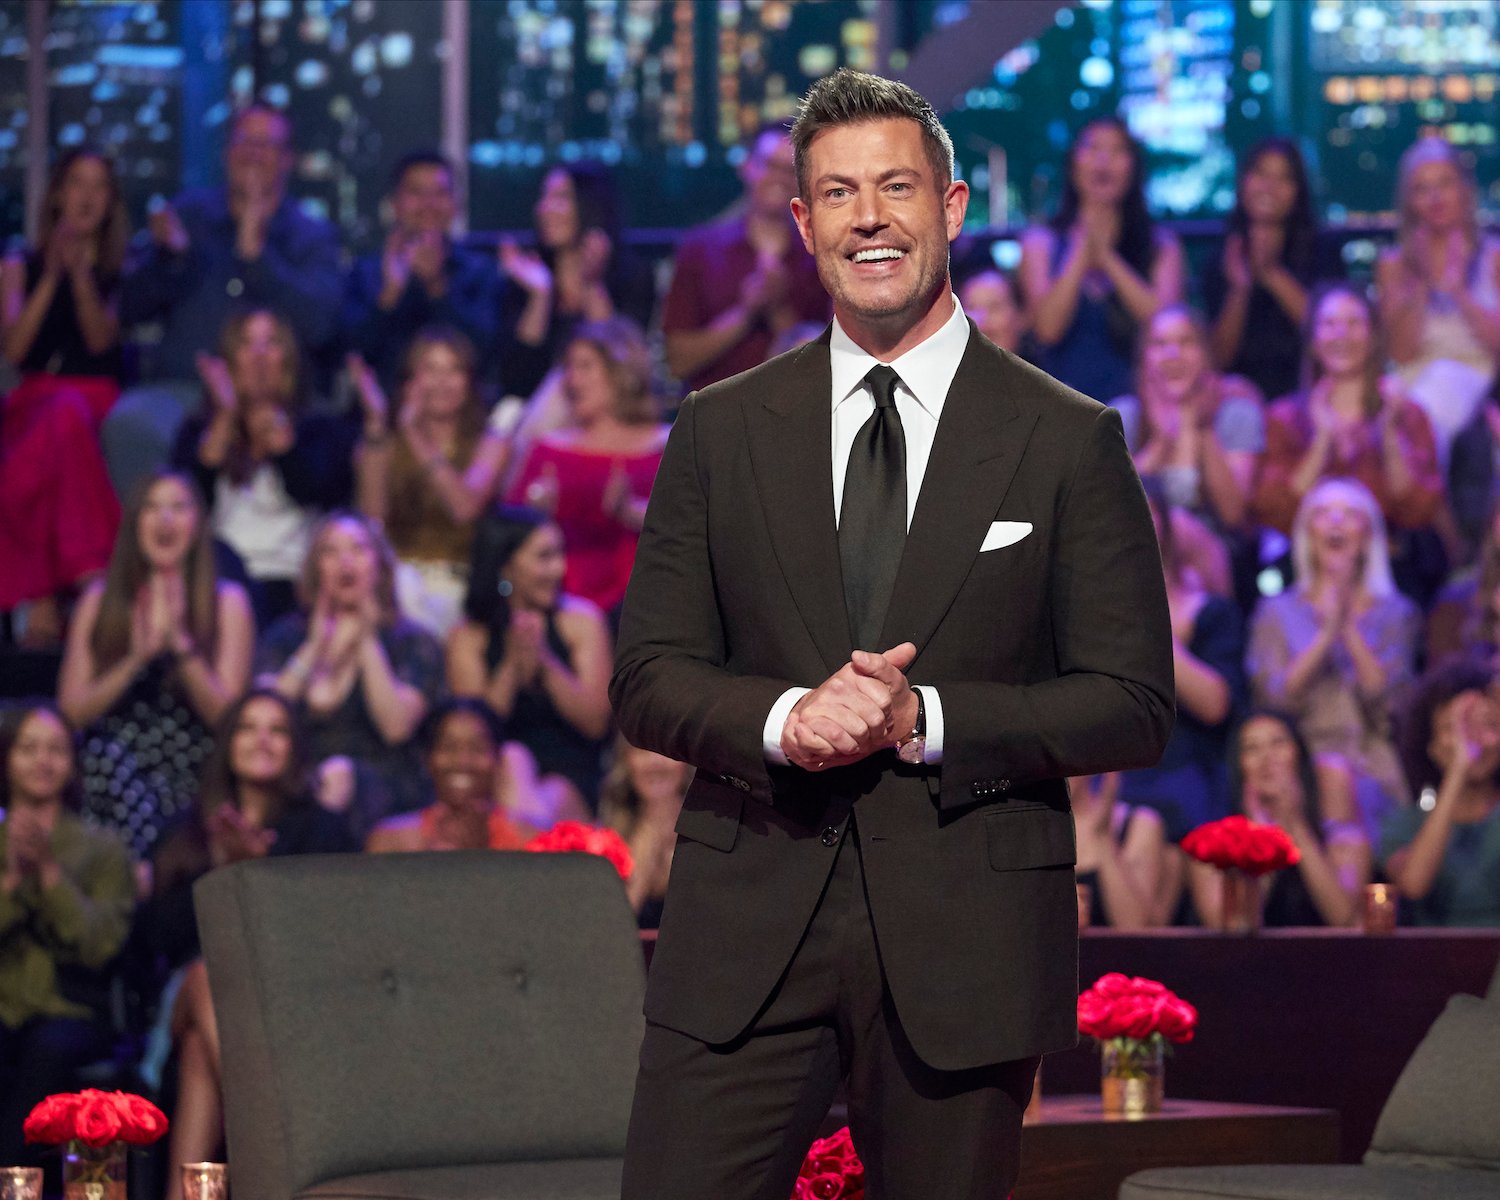 'The Bachelorette' free cruise vouchers were announced by host Jesse Palmer, seen here on the 'Men Tell All' stage.